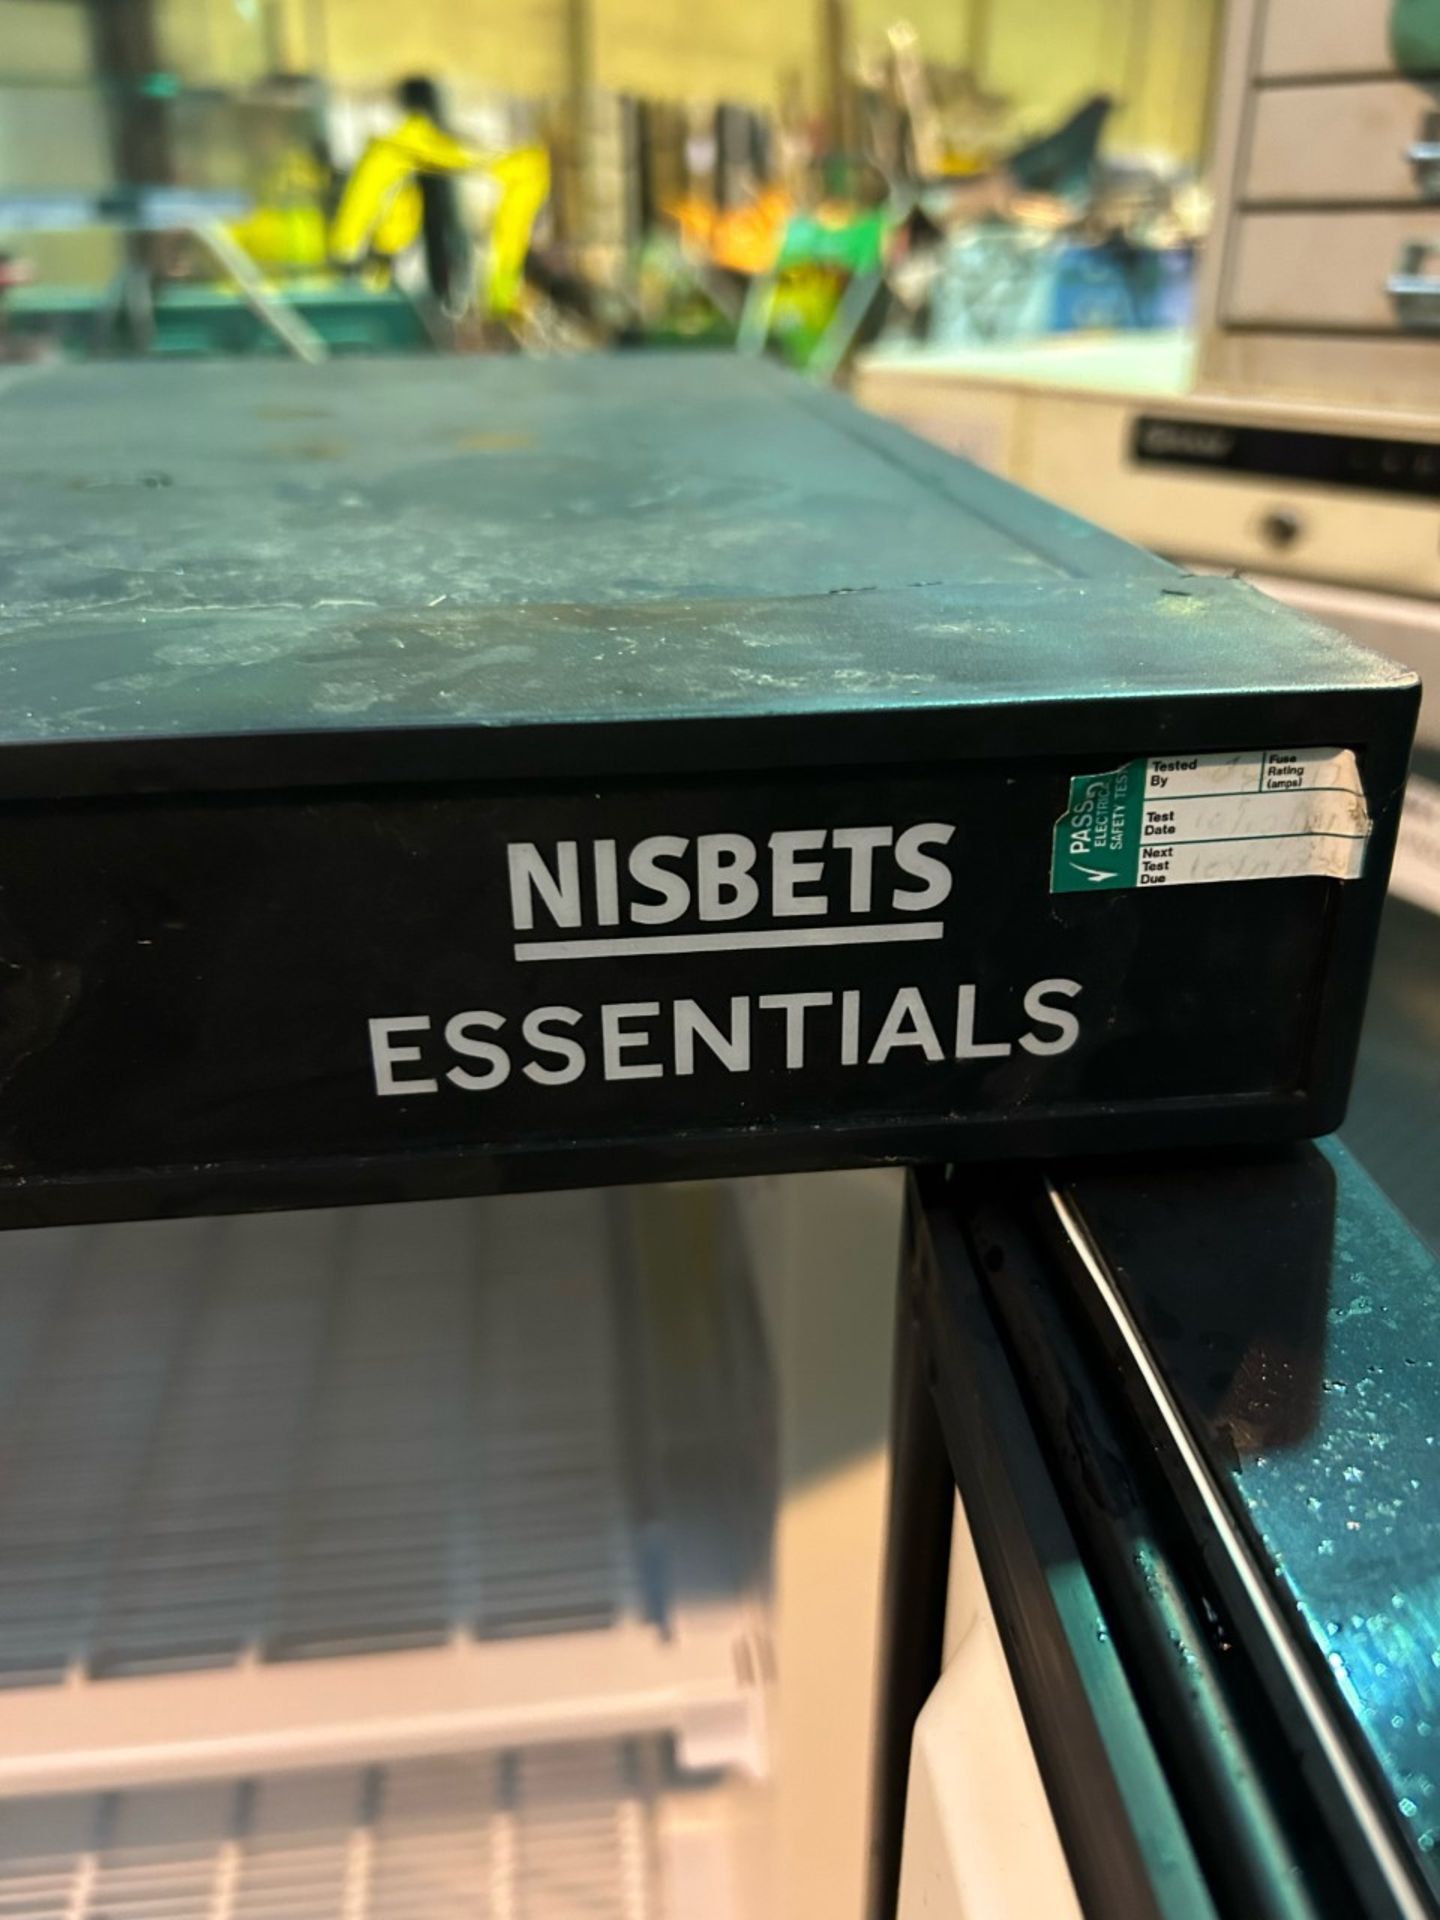 Nisbets essentials undercounted freezer. Good condition. - Image 2 of 3